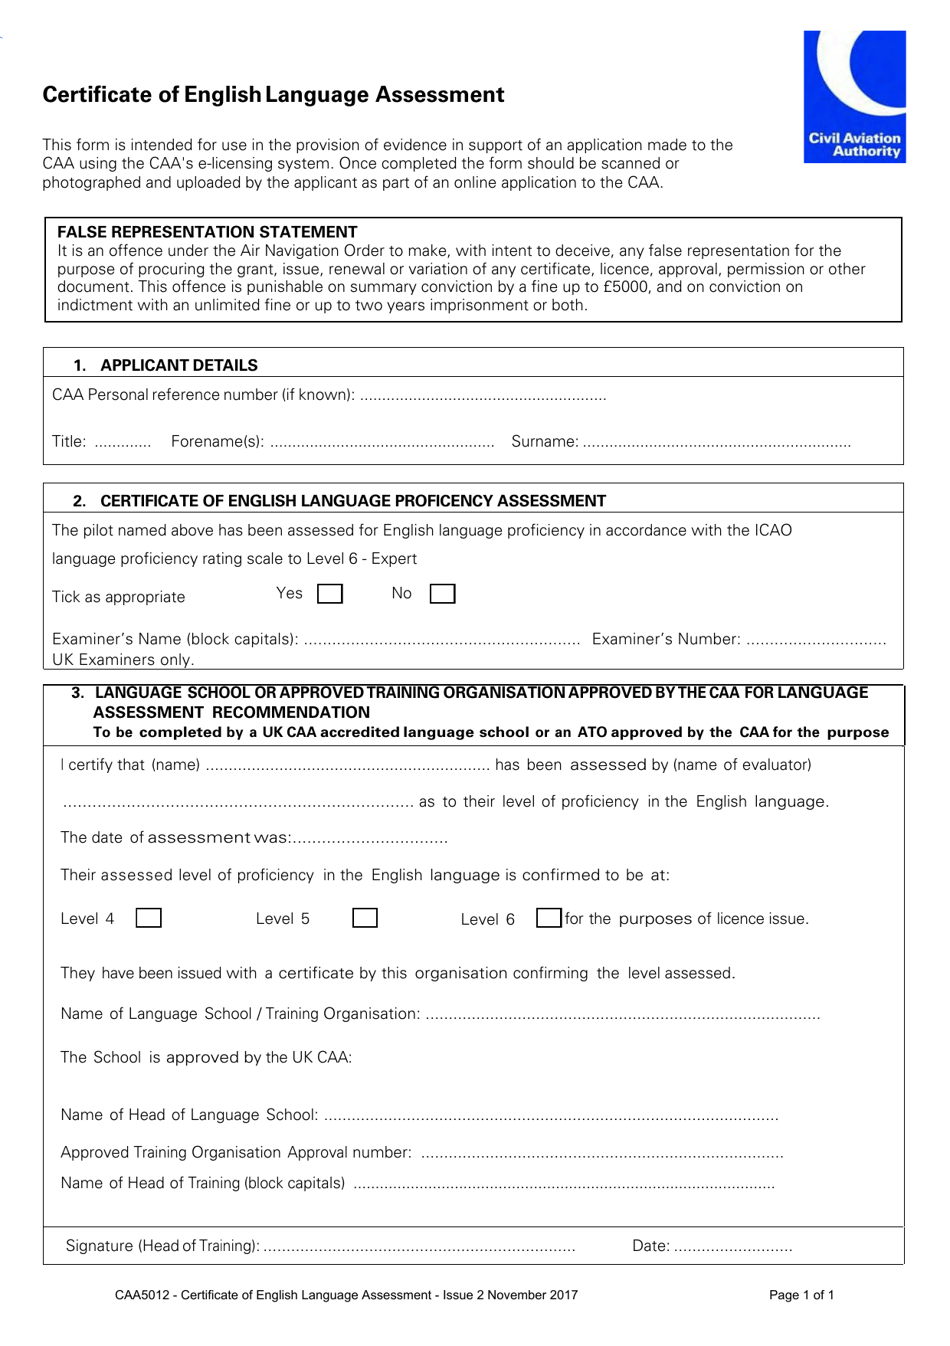 Form CAA5012 Certificate of English Language Assessment - United Kingdom, Page 1